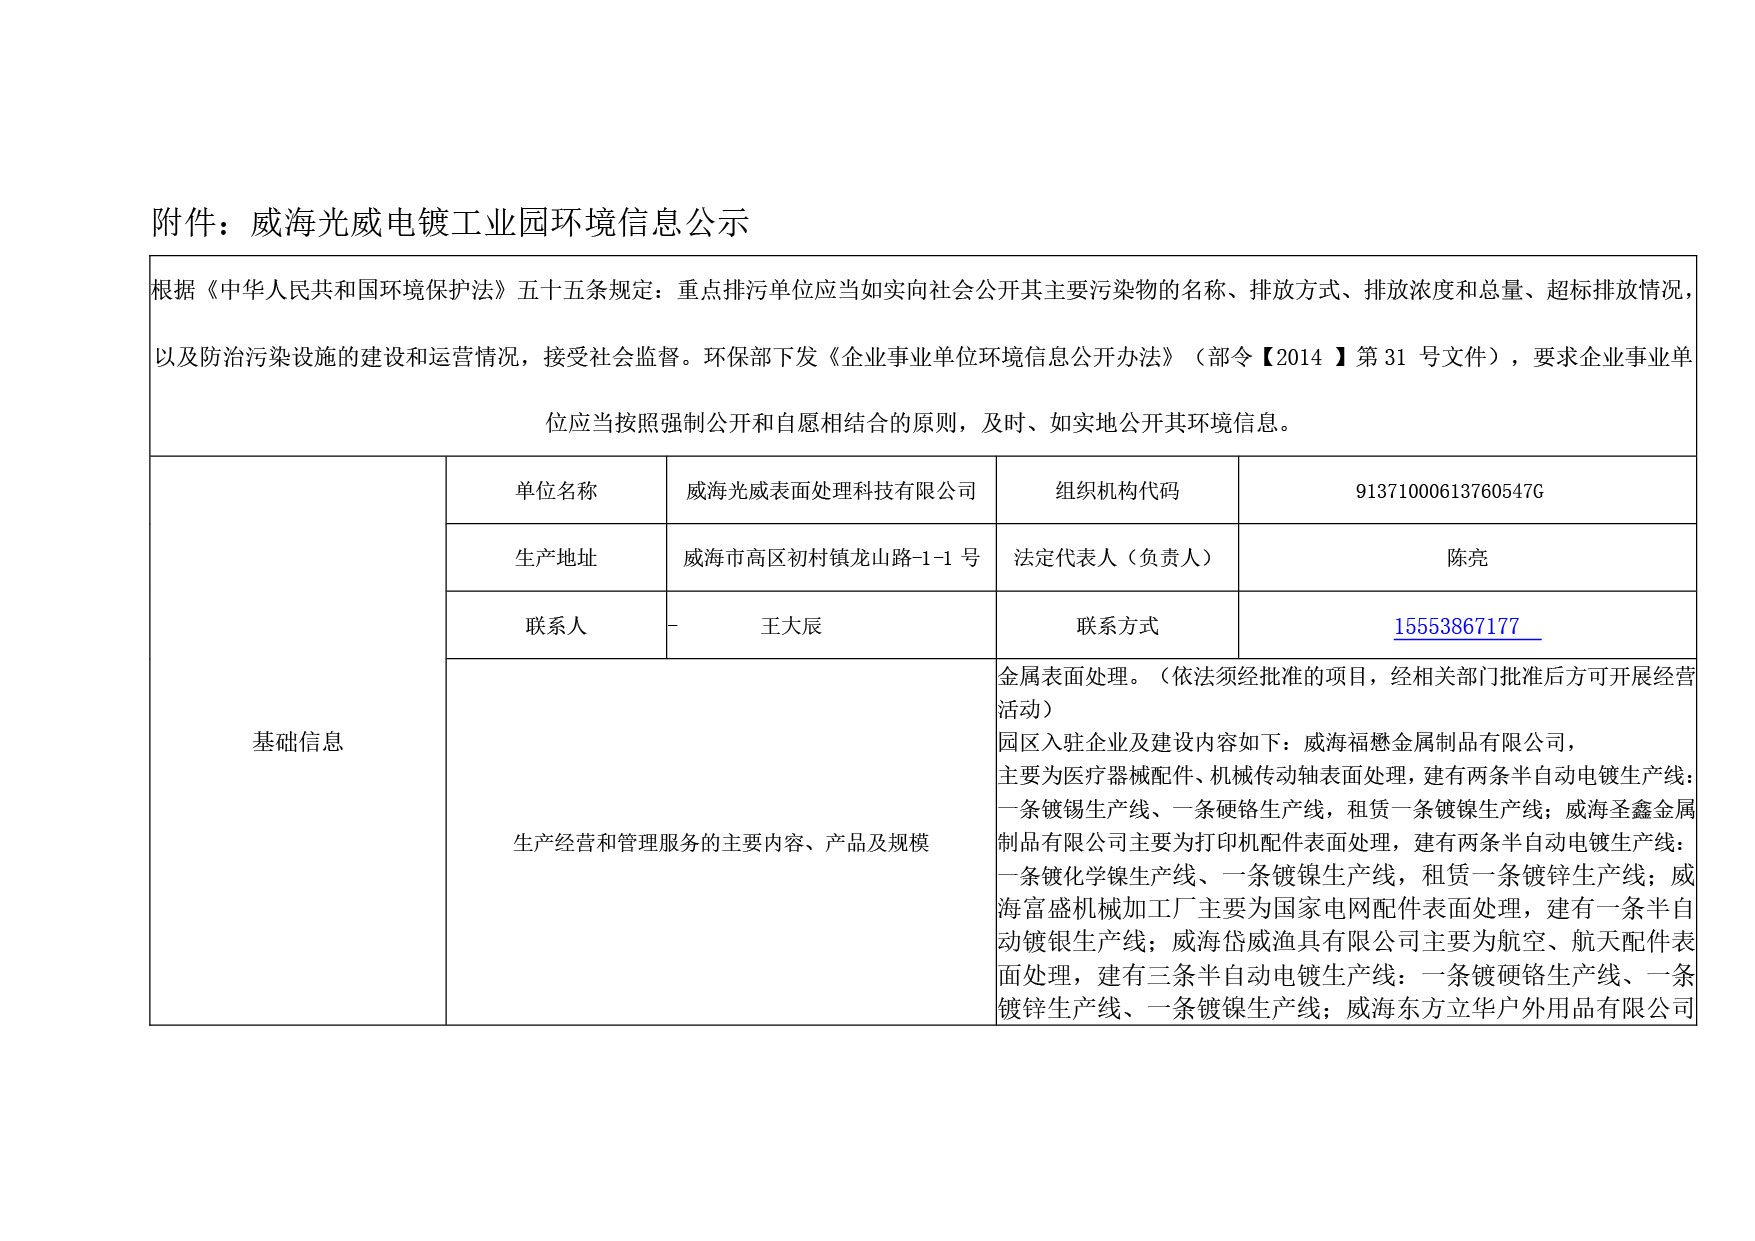 Announcement | Environmental Information Announcement of Weihai Guangwei Electroplating Industrial Park